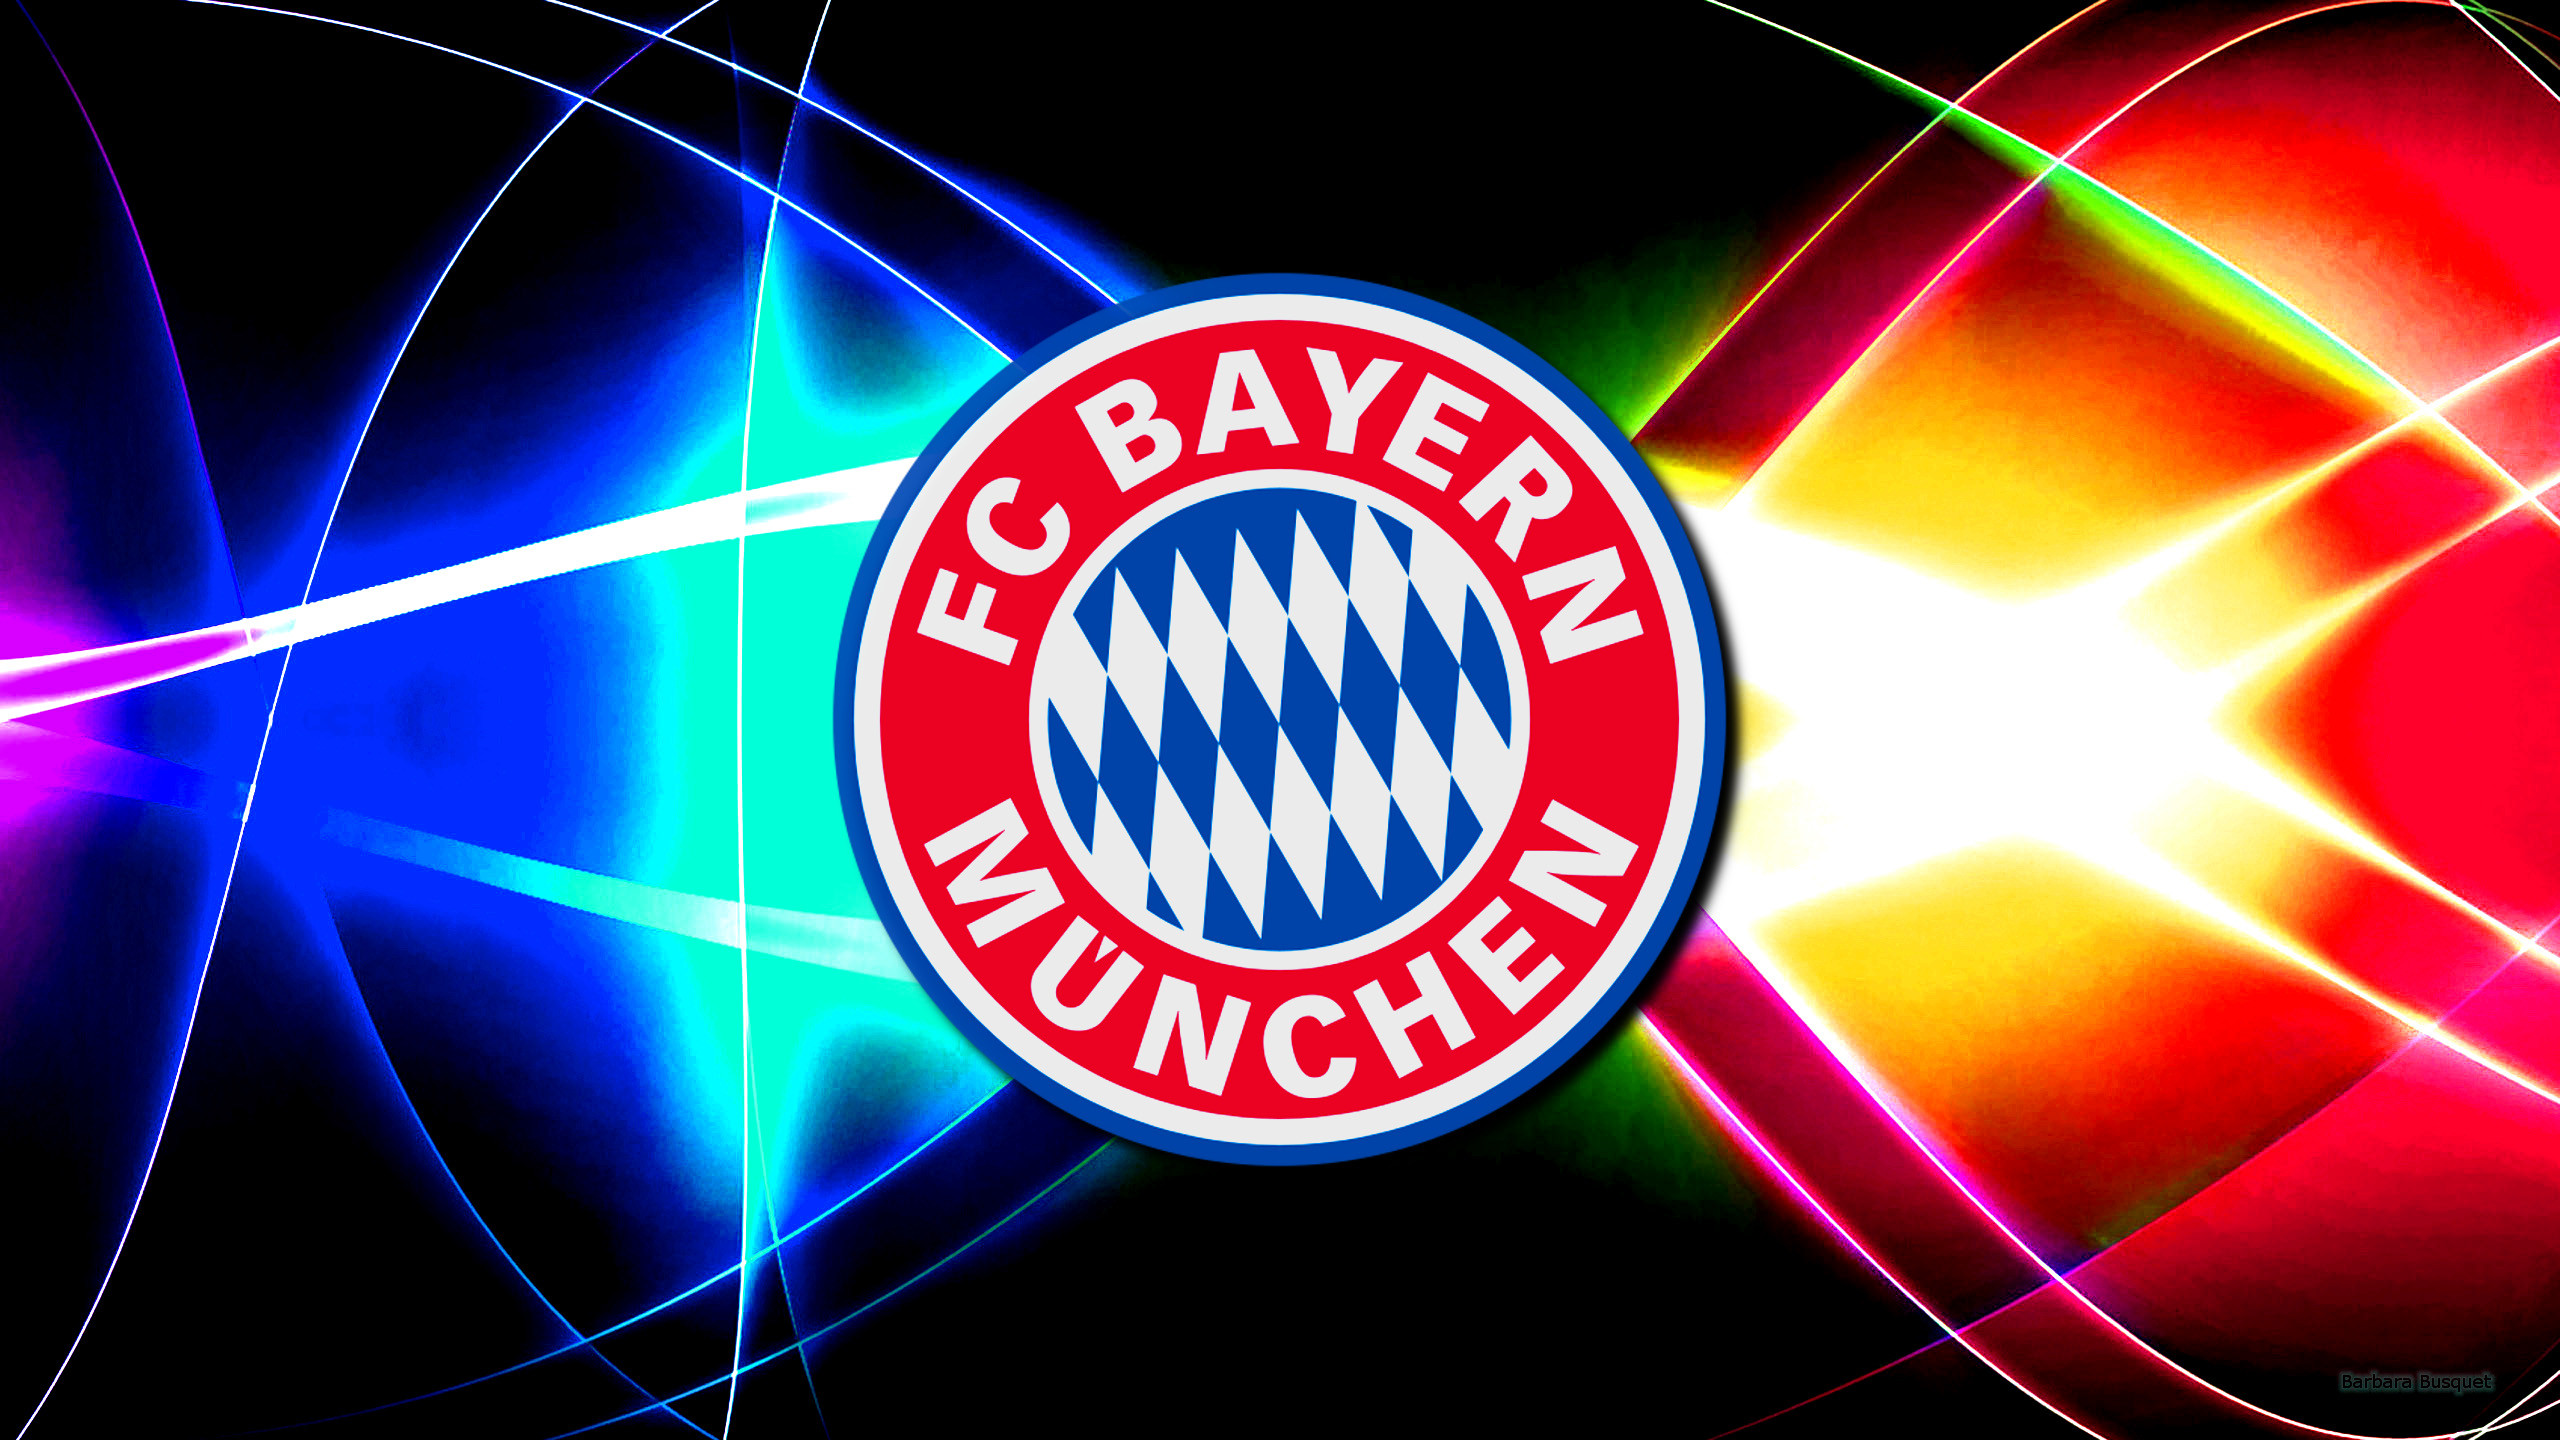 Free Download Fc Bayern Munchen Barbaras Hd Wallpapers 2560x1440 For Your Desktop Mobile Tablet Explore 76 Bayern Munich Wallpaper Bayern Munich Logo Wallpaper Bayern Munich Iphone Wallpaper Bayern Munchen